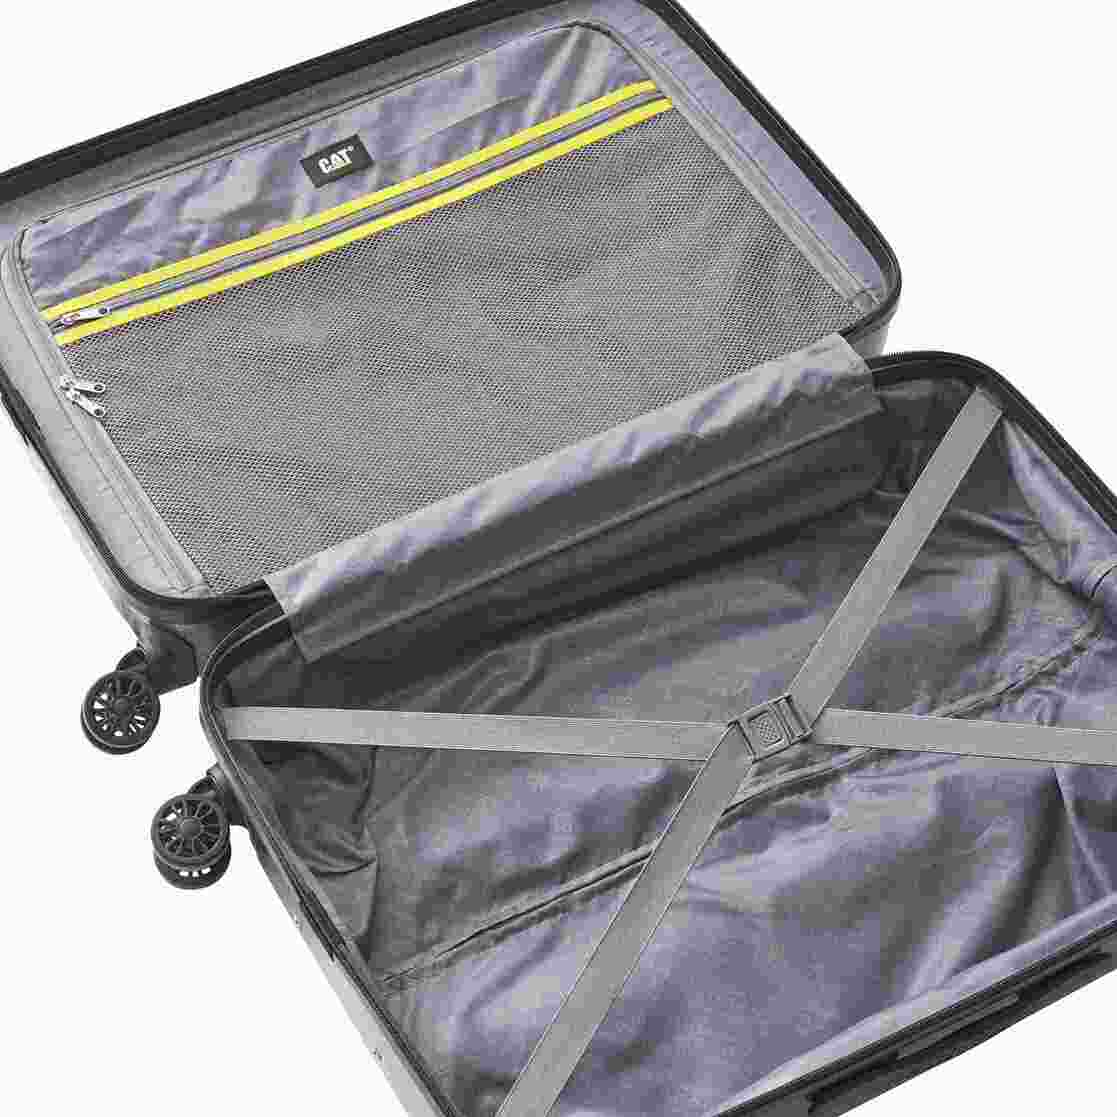 D 2.0 34 Ltrs 55 Cms ABS Small Cabin Luggage Trolley Travel Bag